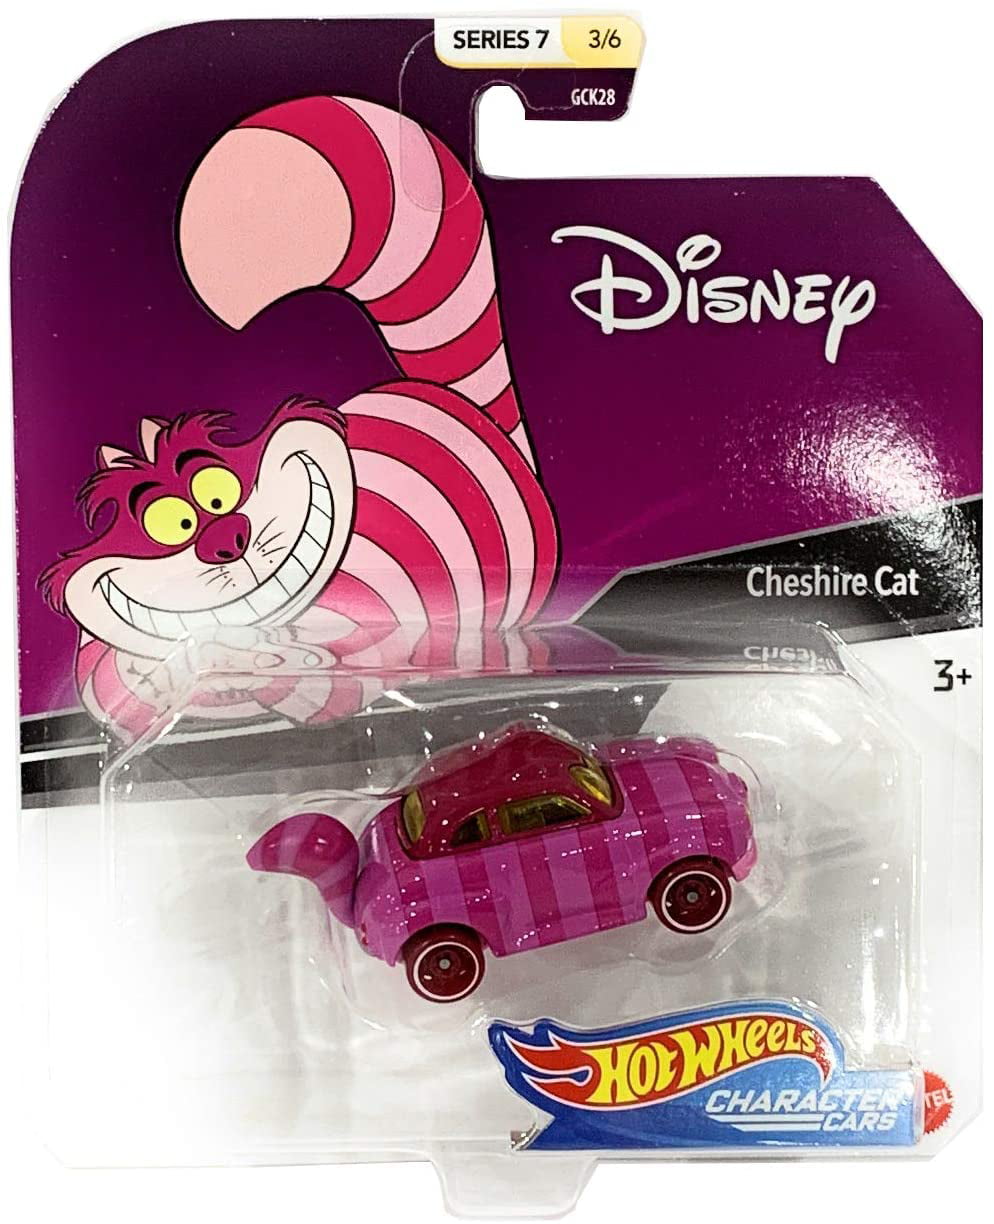 6 Hot Wheels 2020 Character Cars Disney Mulan Tigger Cheshire Cat Jack Series 7 for sale online